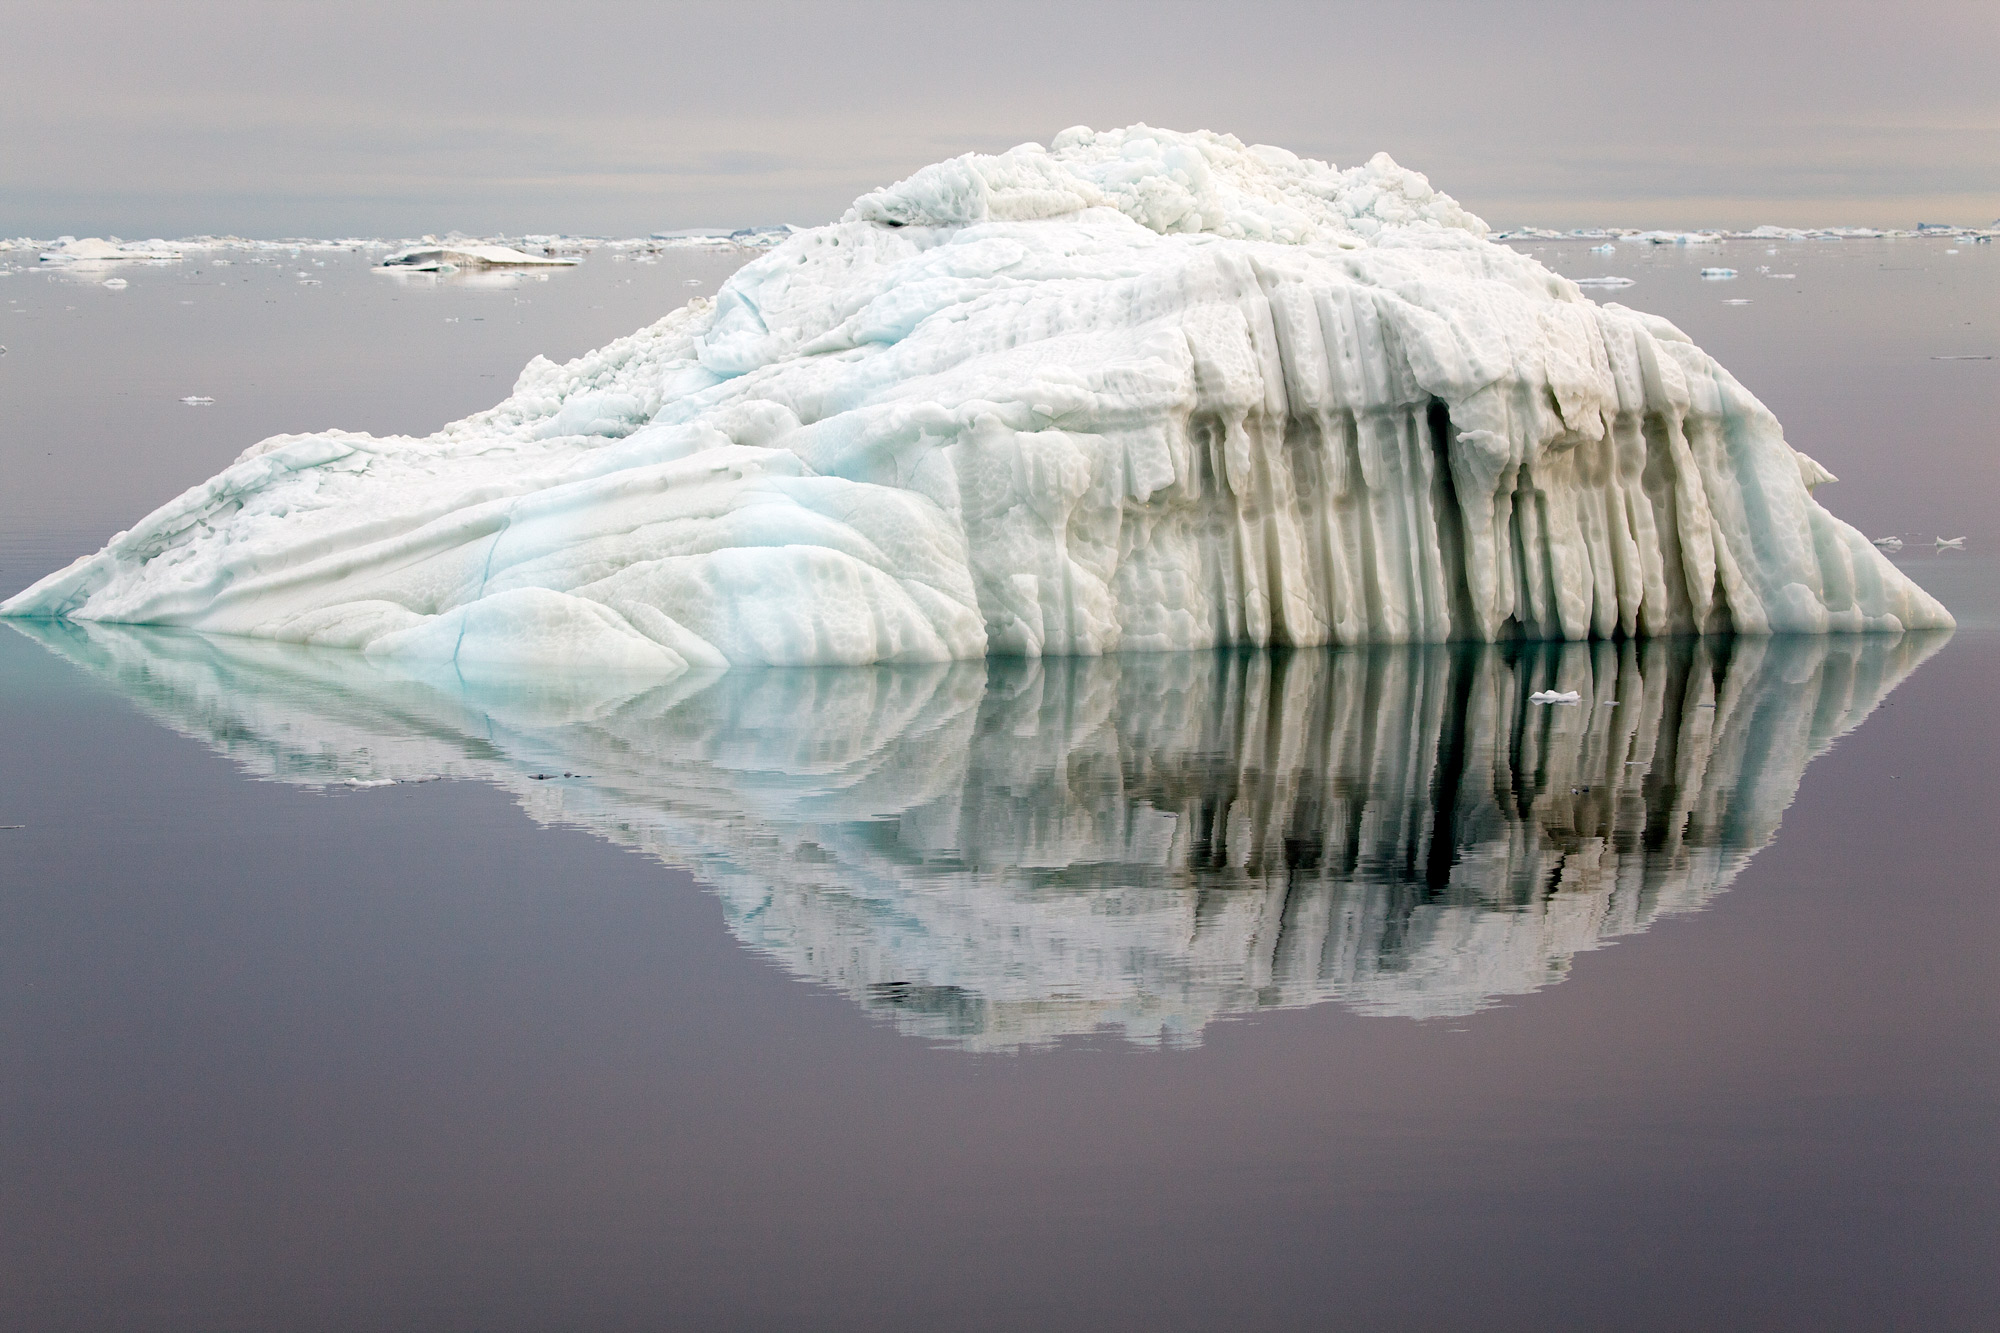 Iceberg with furrows made by ocean water